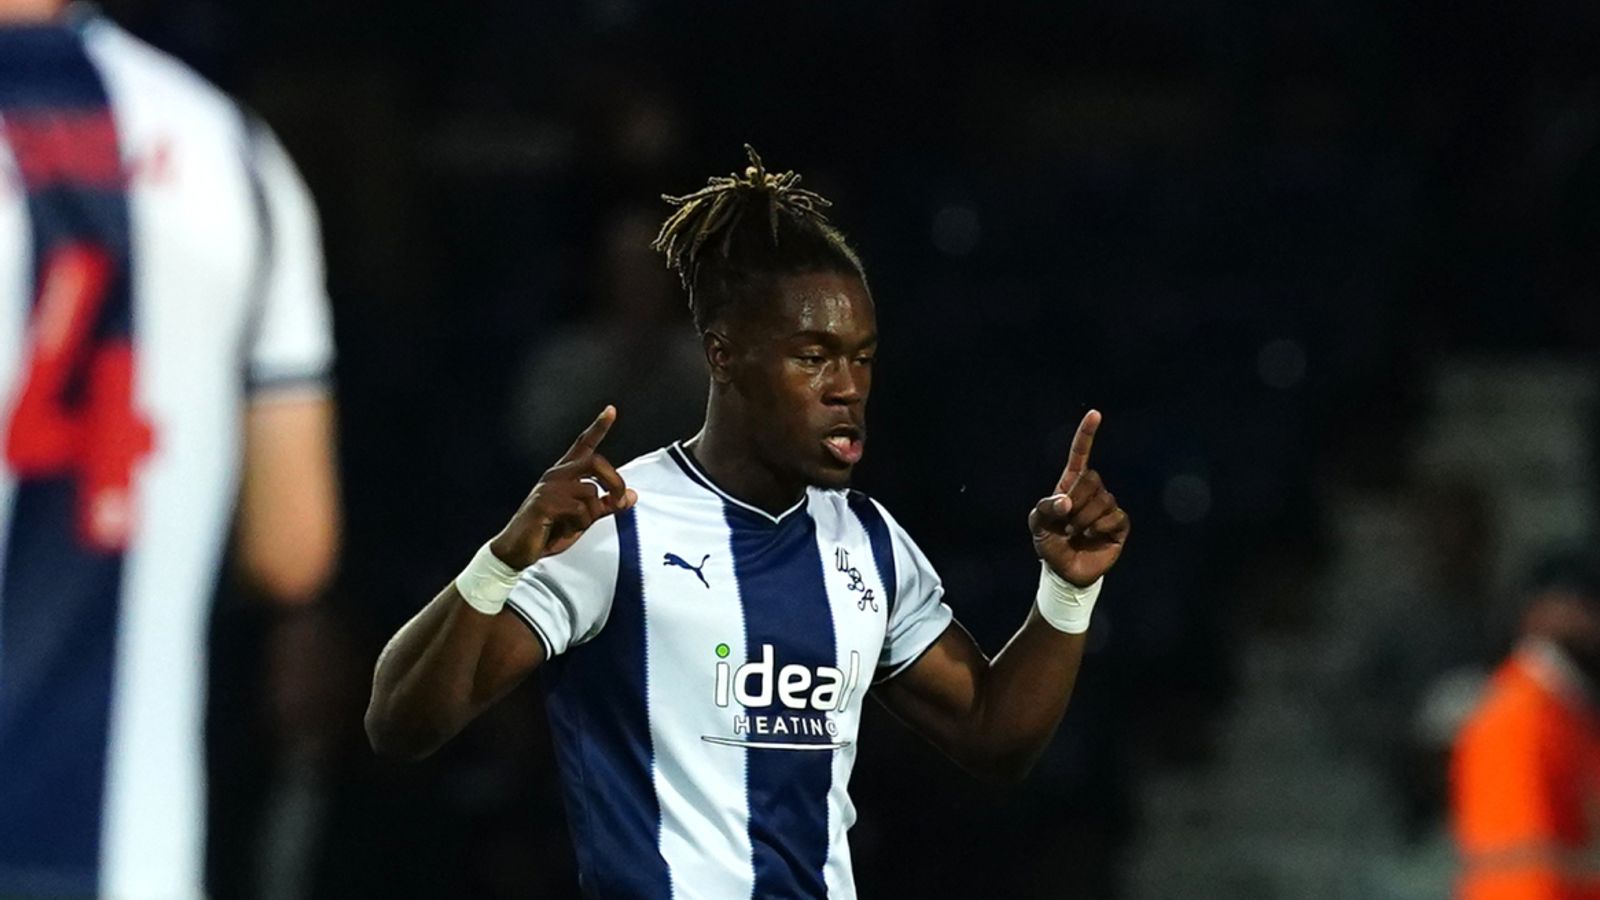 PREVIEW: WEST BROMWICH ALBION (H) - News - Huddersfield Town